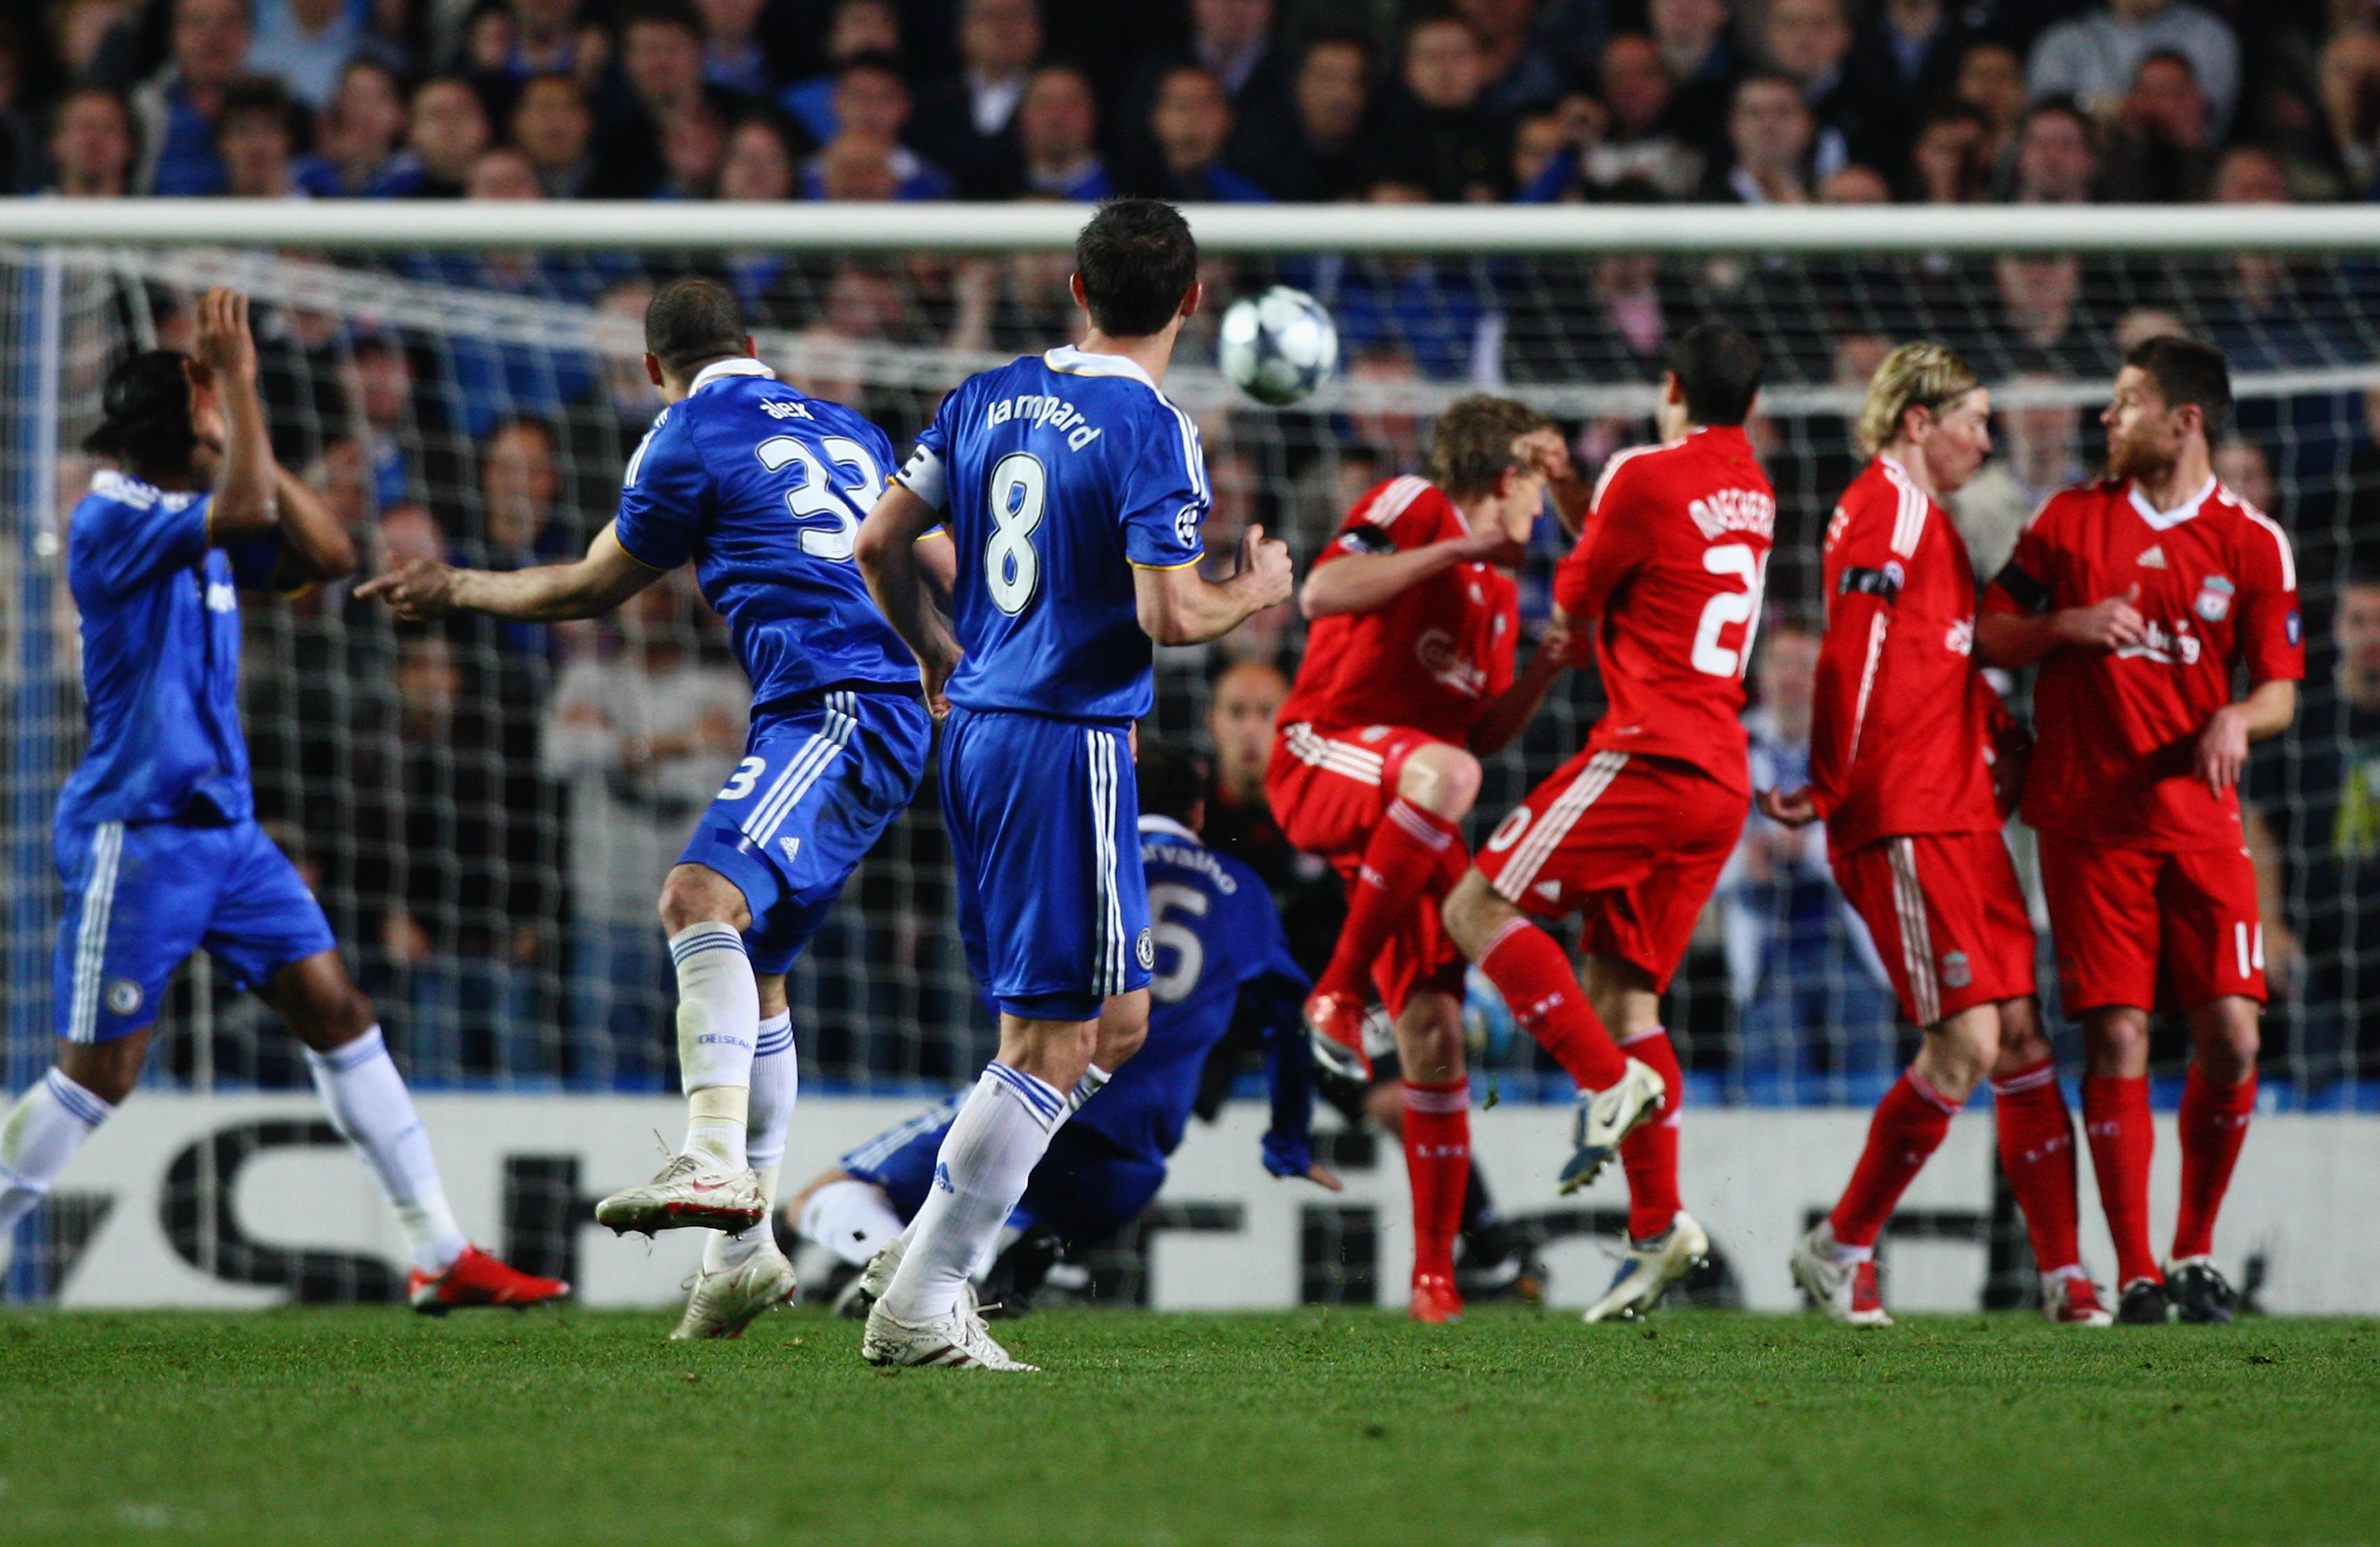 LONDON, ENGLAND - APRIL 14: Alex of Chelsea scores his team's second goal during the UEFA Champions League Quarter Final Second Leg match between Chelsea and Liverpool at Stamford Bridge on April 14, 2009 in London, England.  (Photo by Ryan Pierse/Getty I